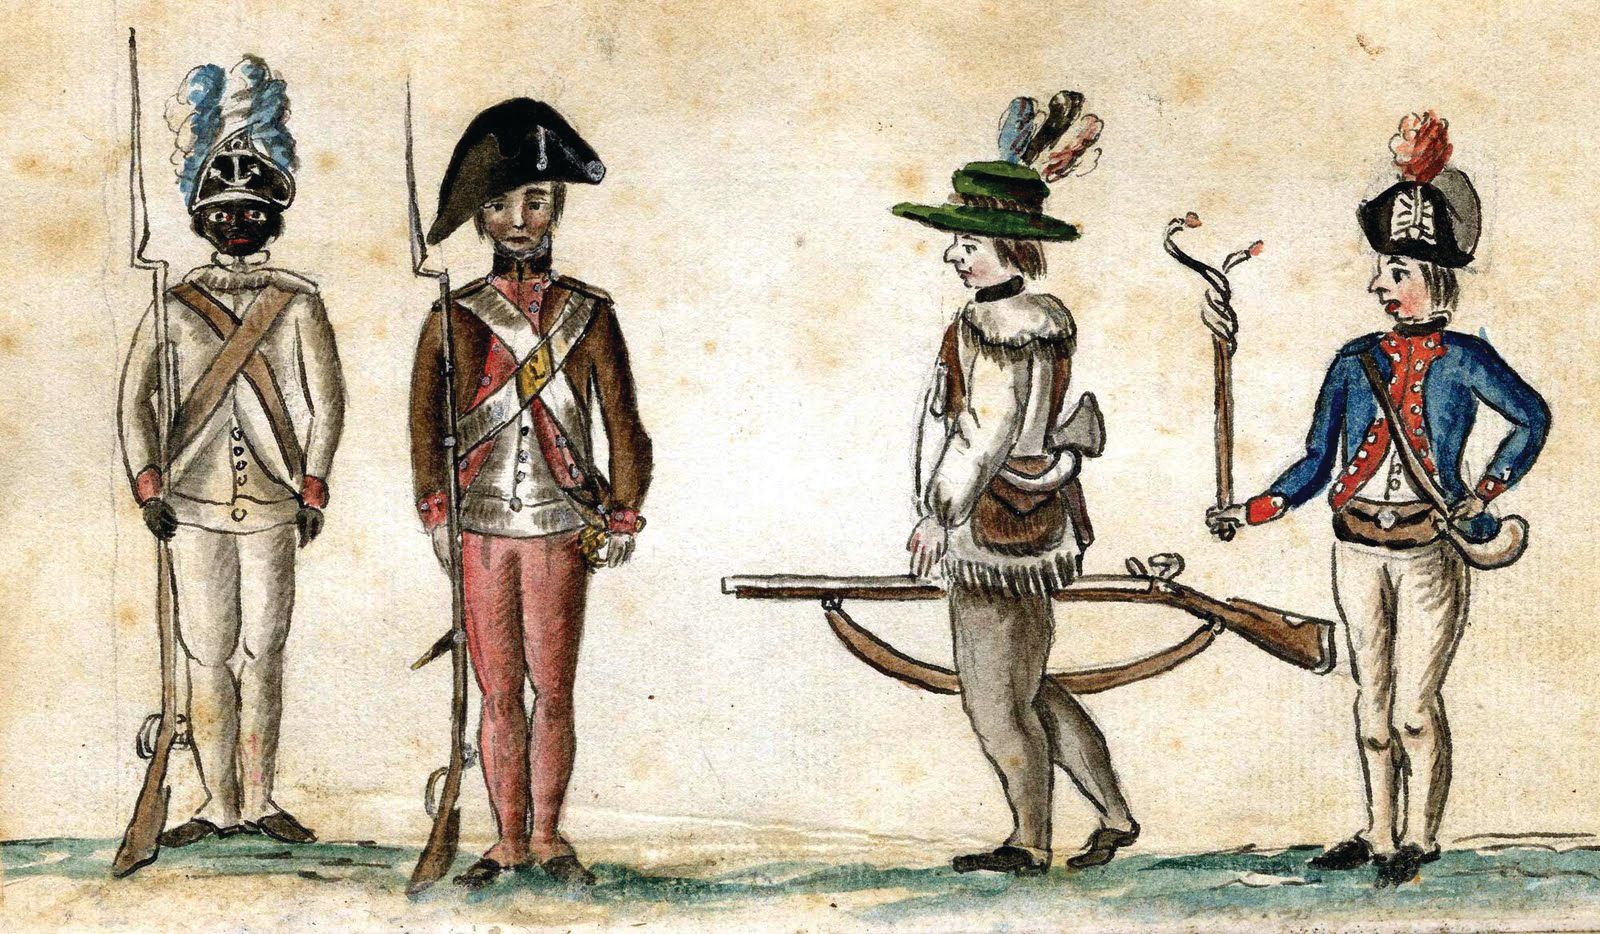 A French officer sketched various American soldiers at Yorktown, including, left to right, an African American soldier from Rhode Island, a Regular musketeer, a backwoods rifleman, and an artilleryman holding a burning match-cord used to ignite cannon charges. 